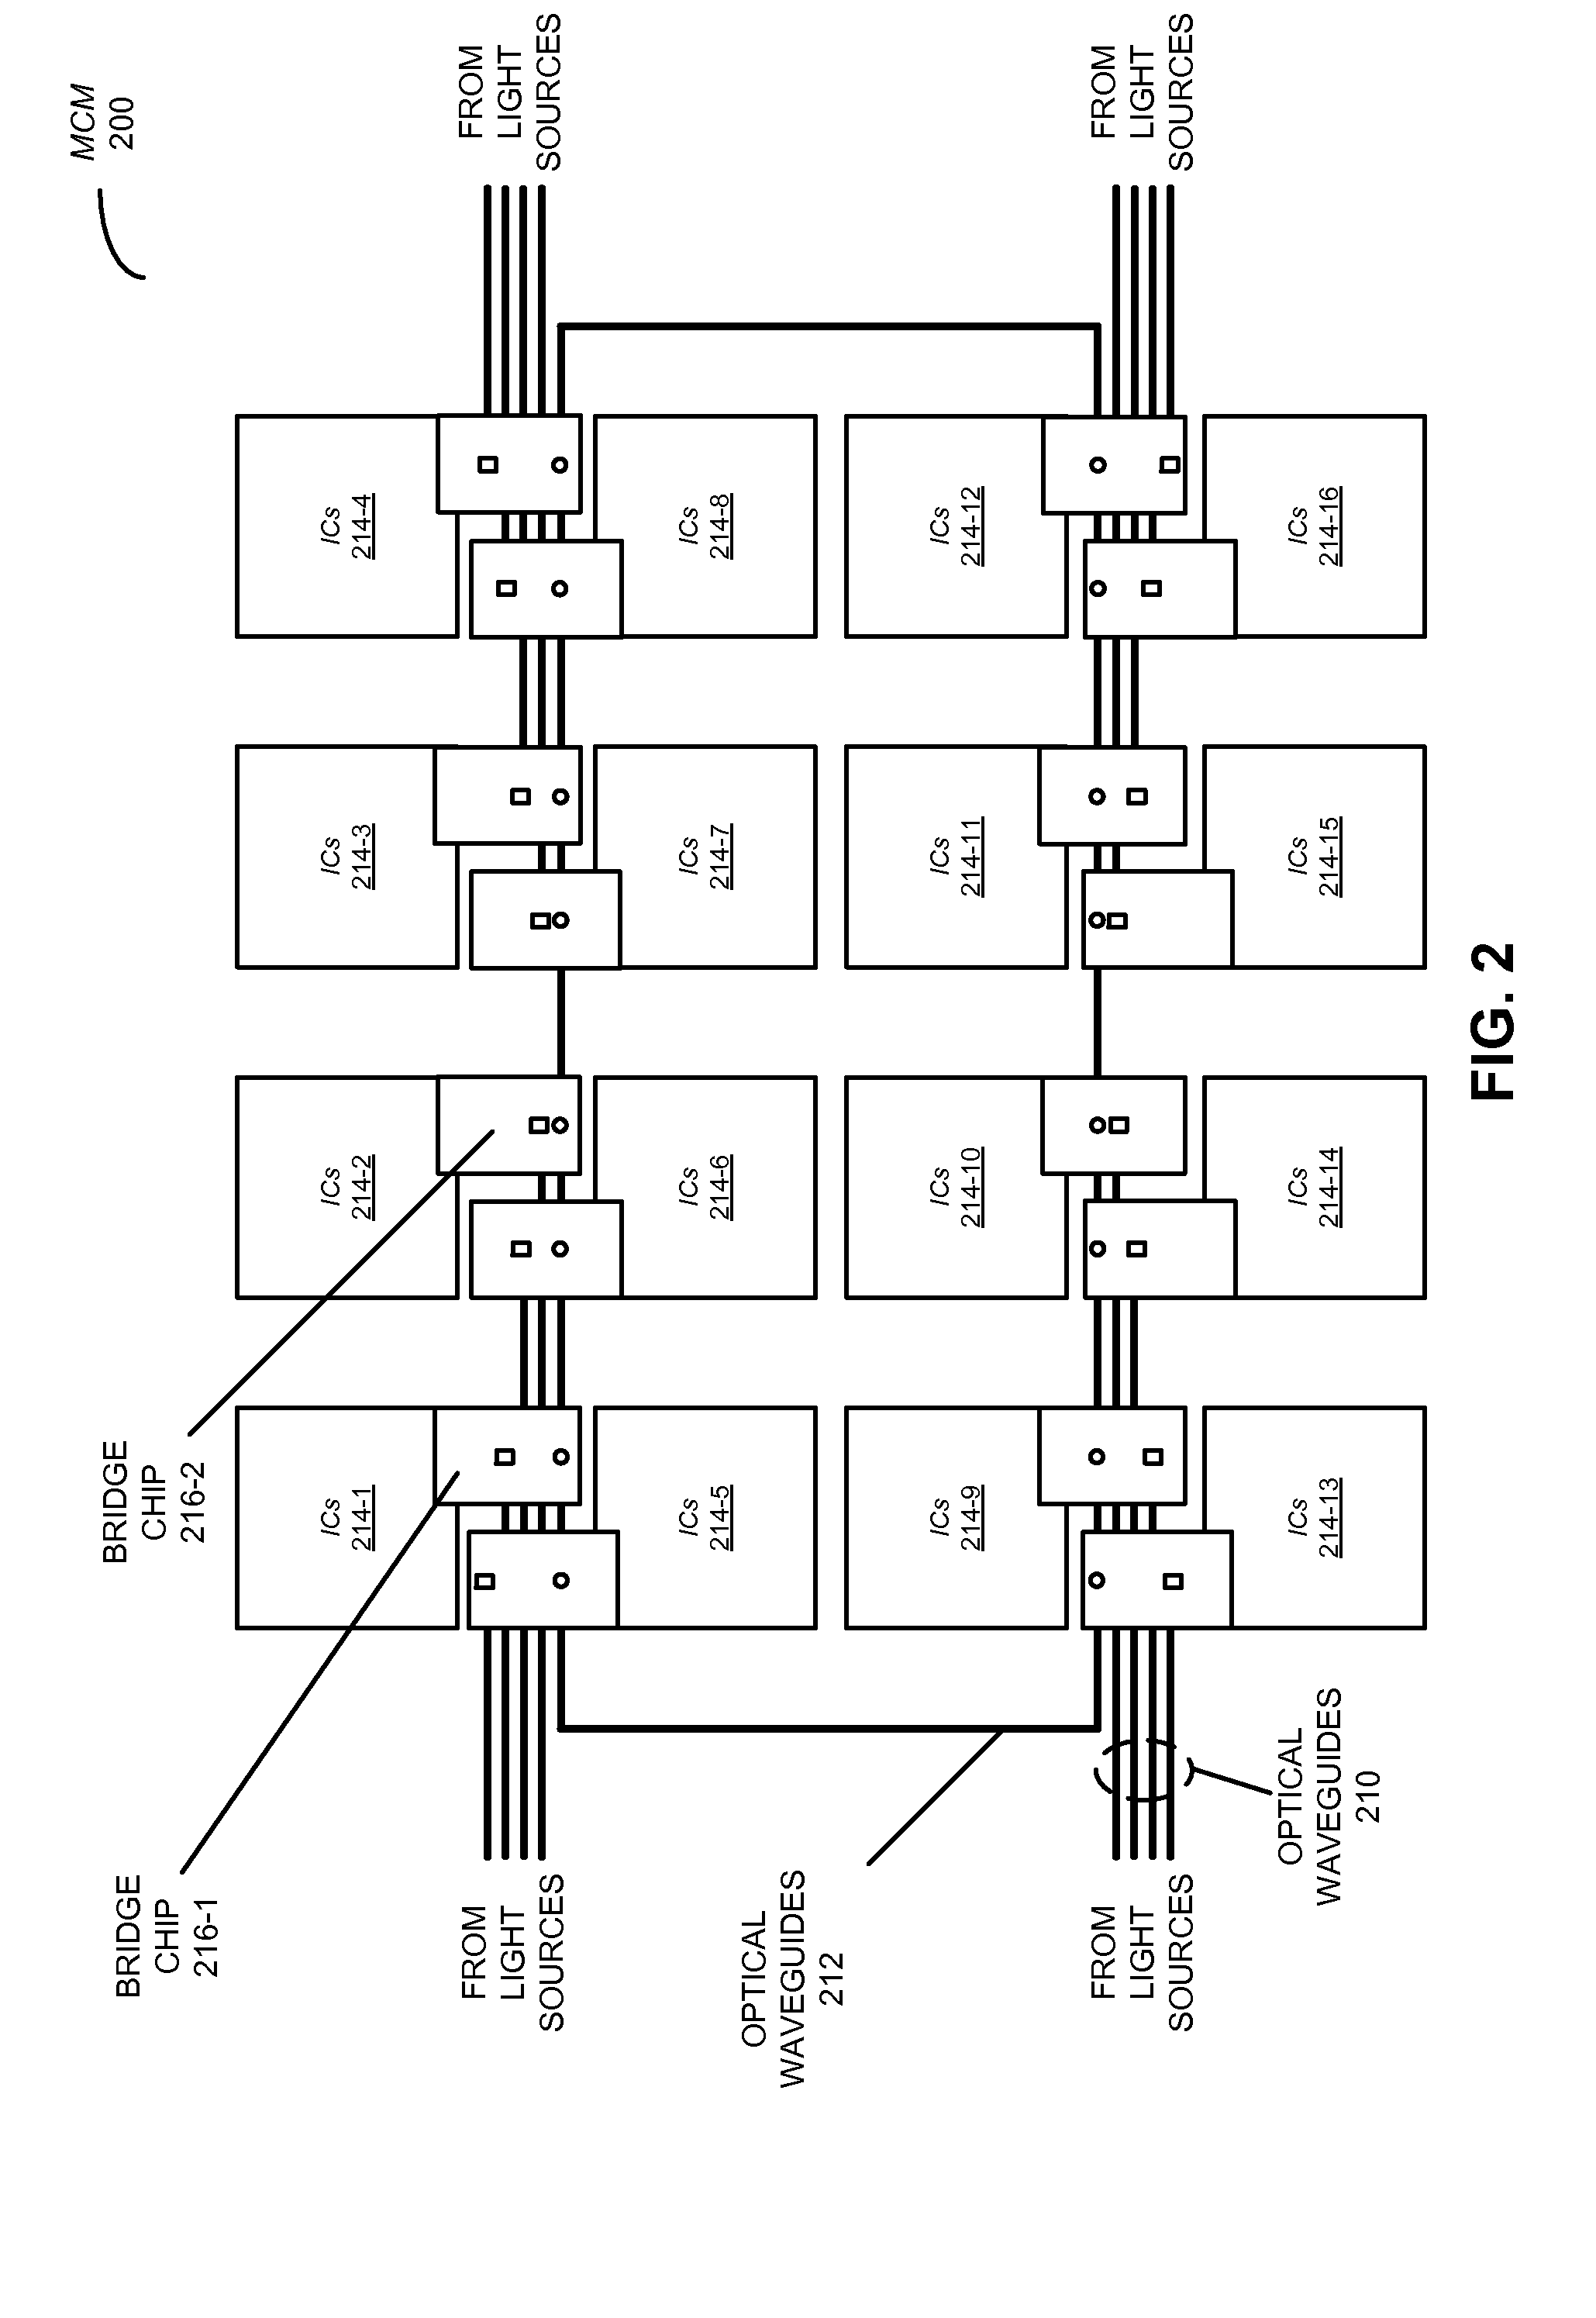 Single-layer optical point-to-point network